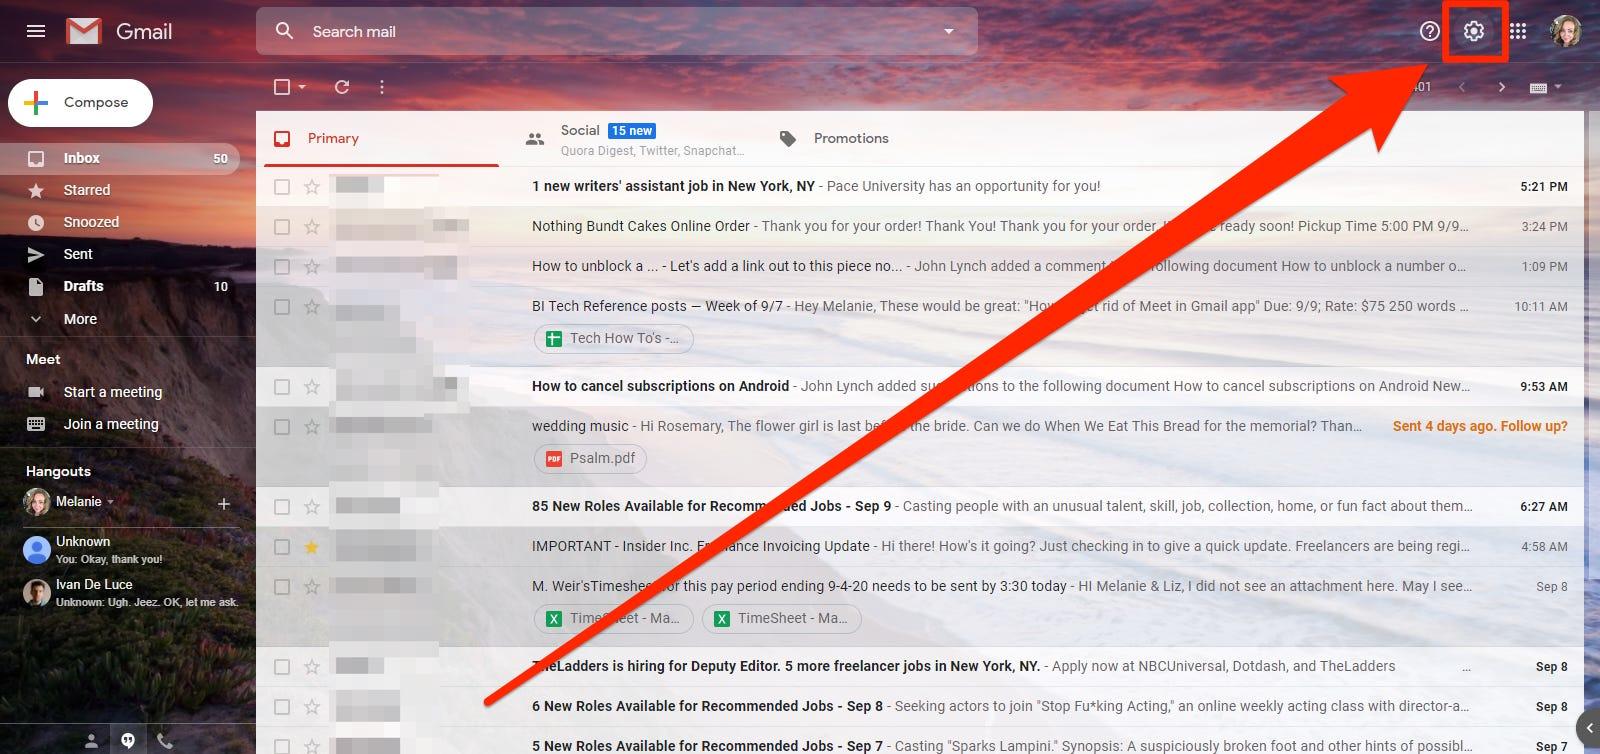 max size email for gmail